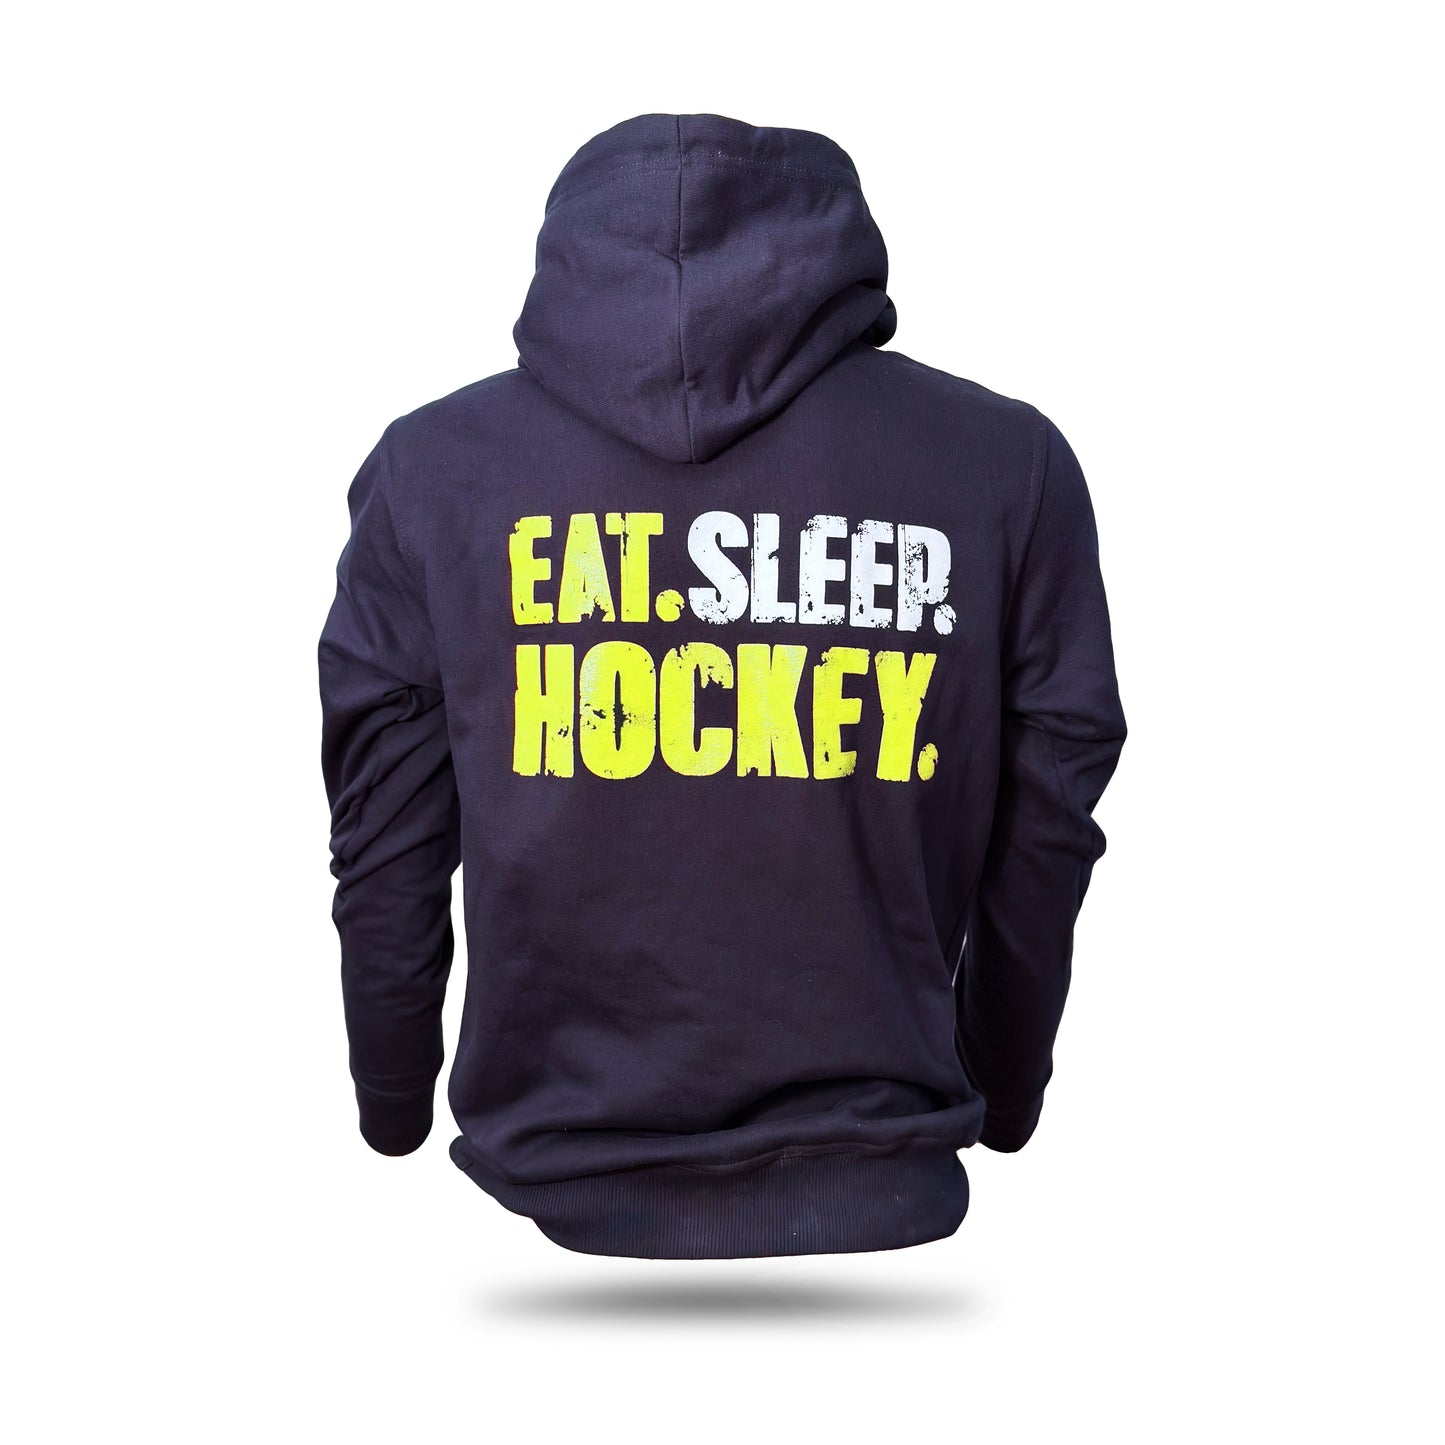 Rink Rat Hoodie Navy and Fluo